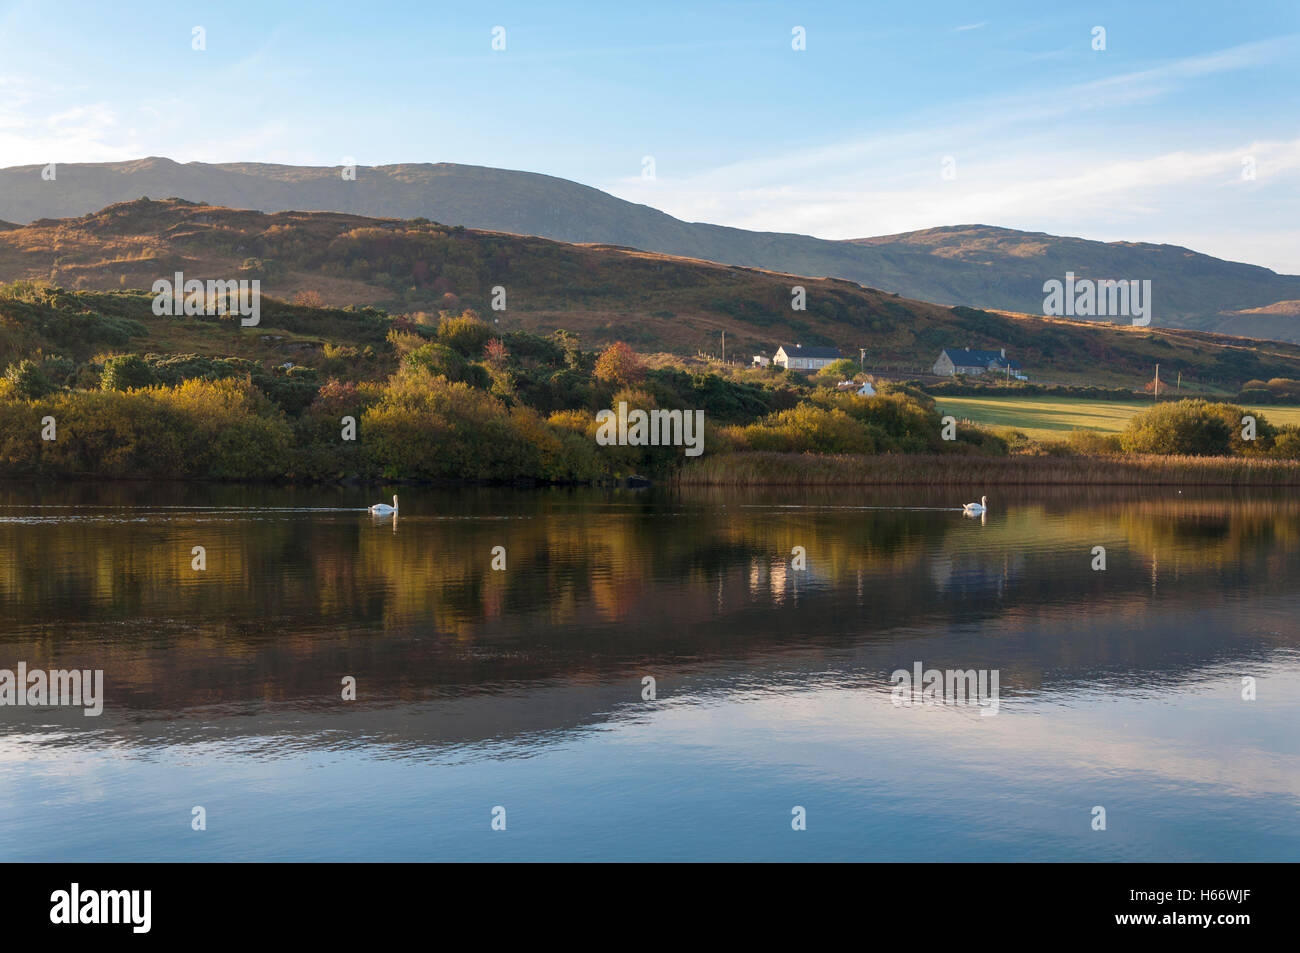 Swans and reflections in Lake Shanaghan, Ardara, County Donegal, Ireland Stock Photo